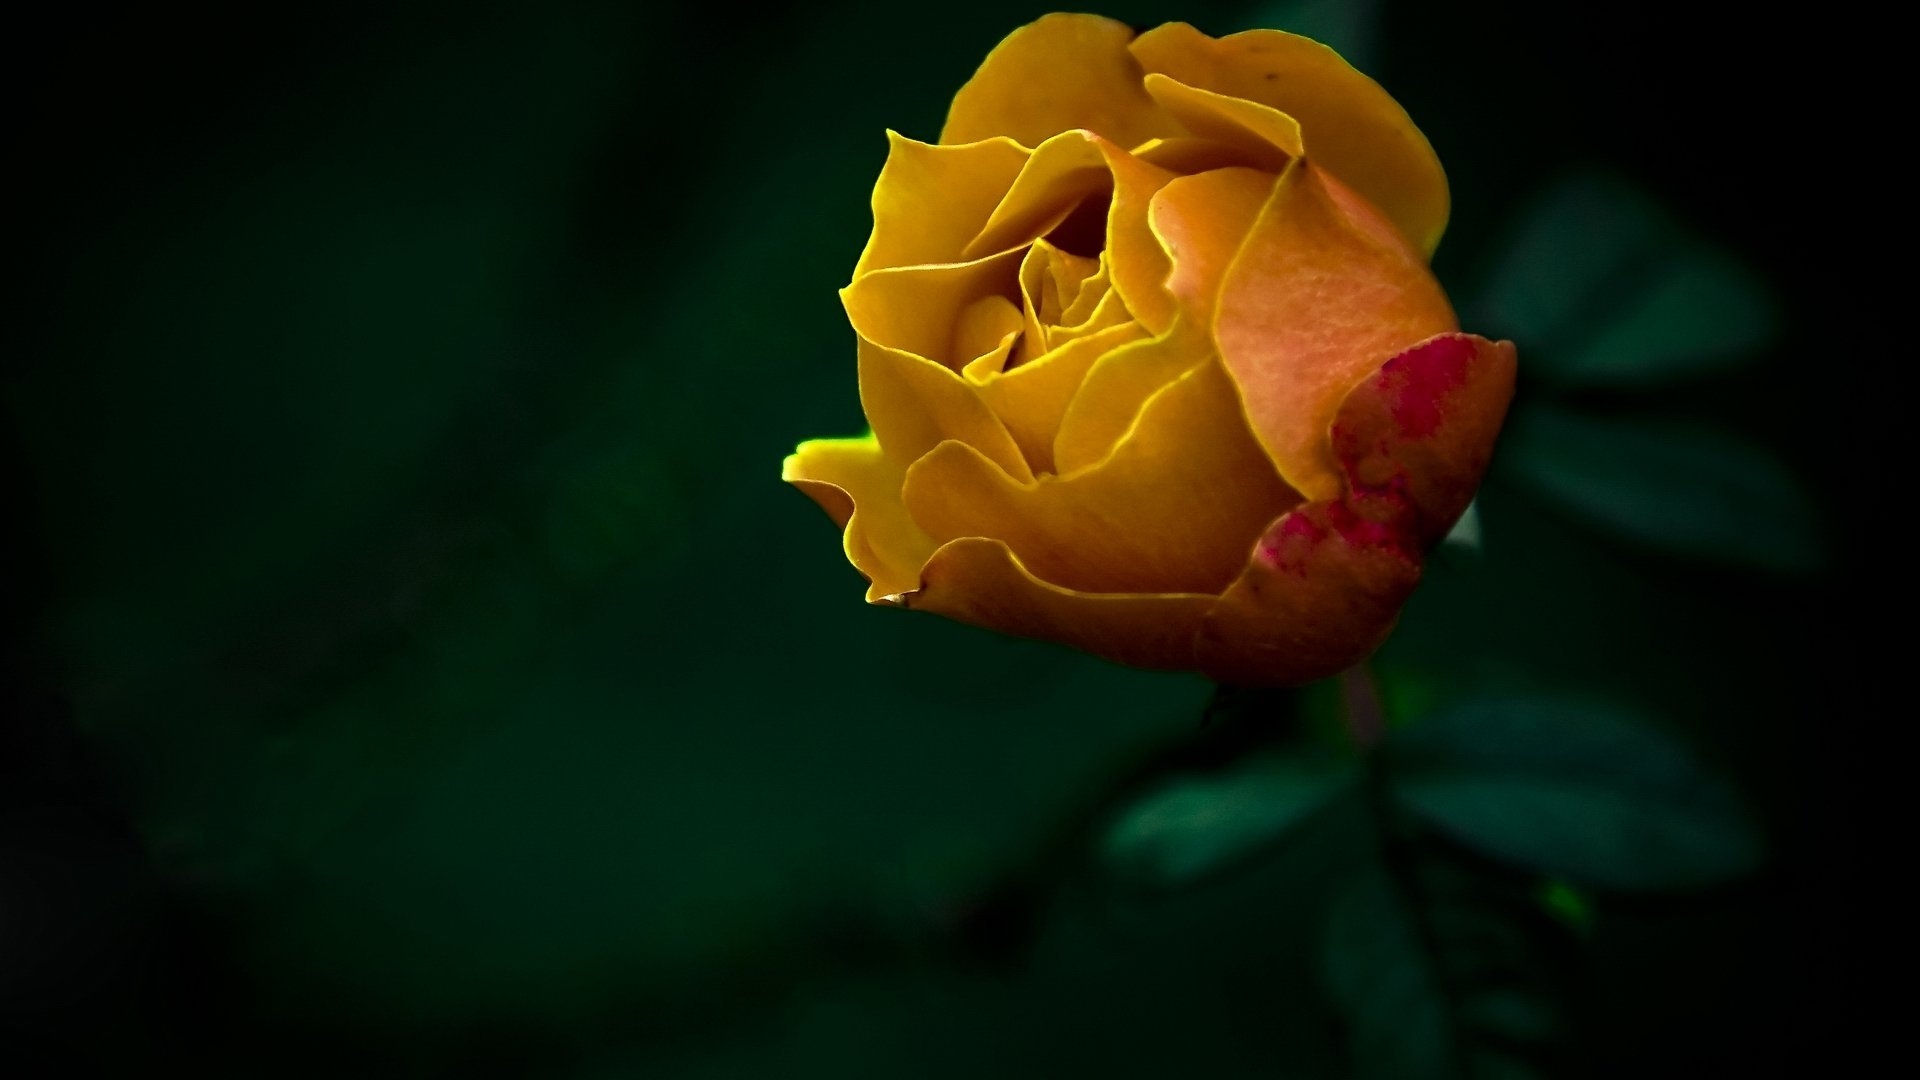 The last Rose for 1920 x 1080 HDTV 1080p resolution